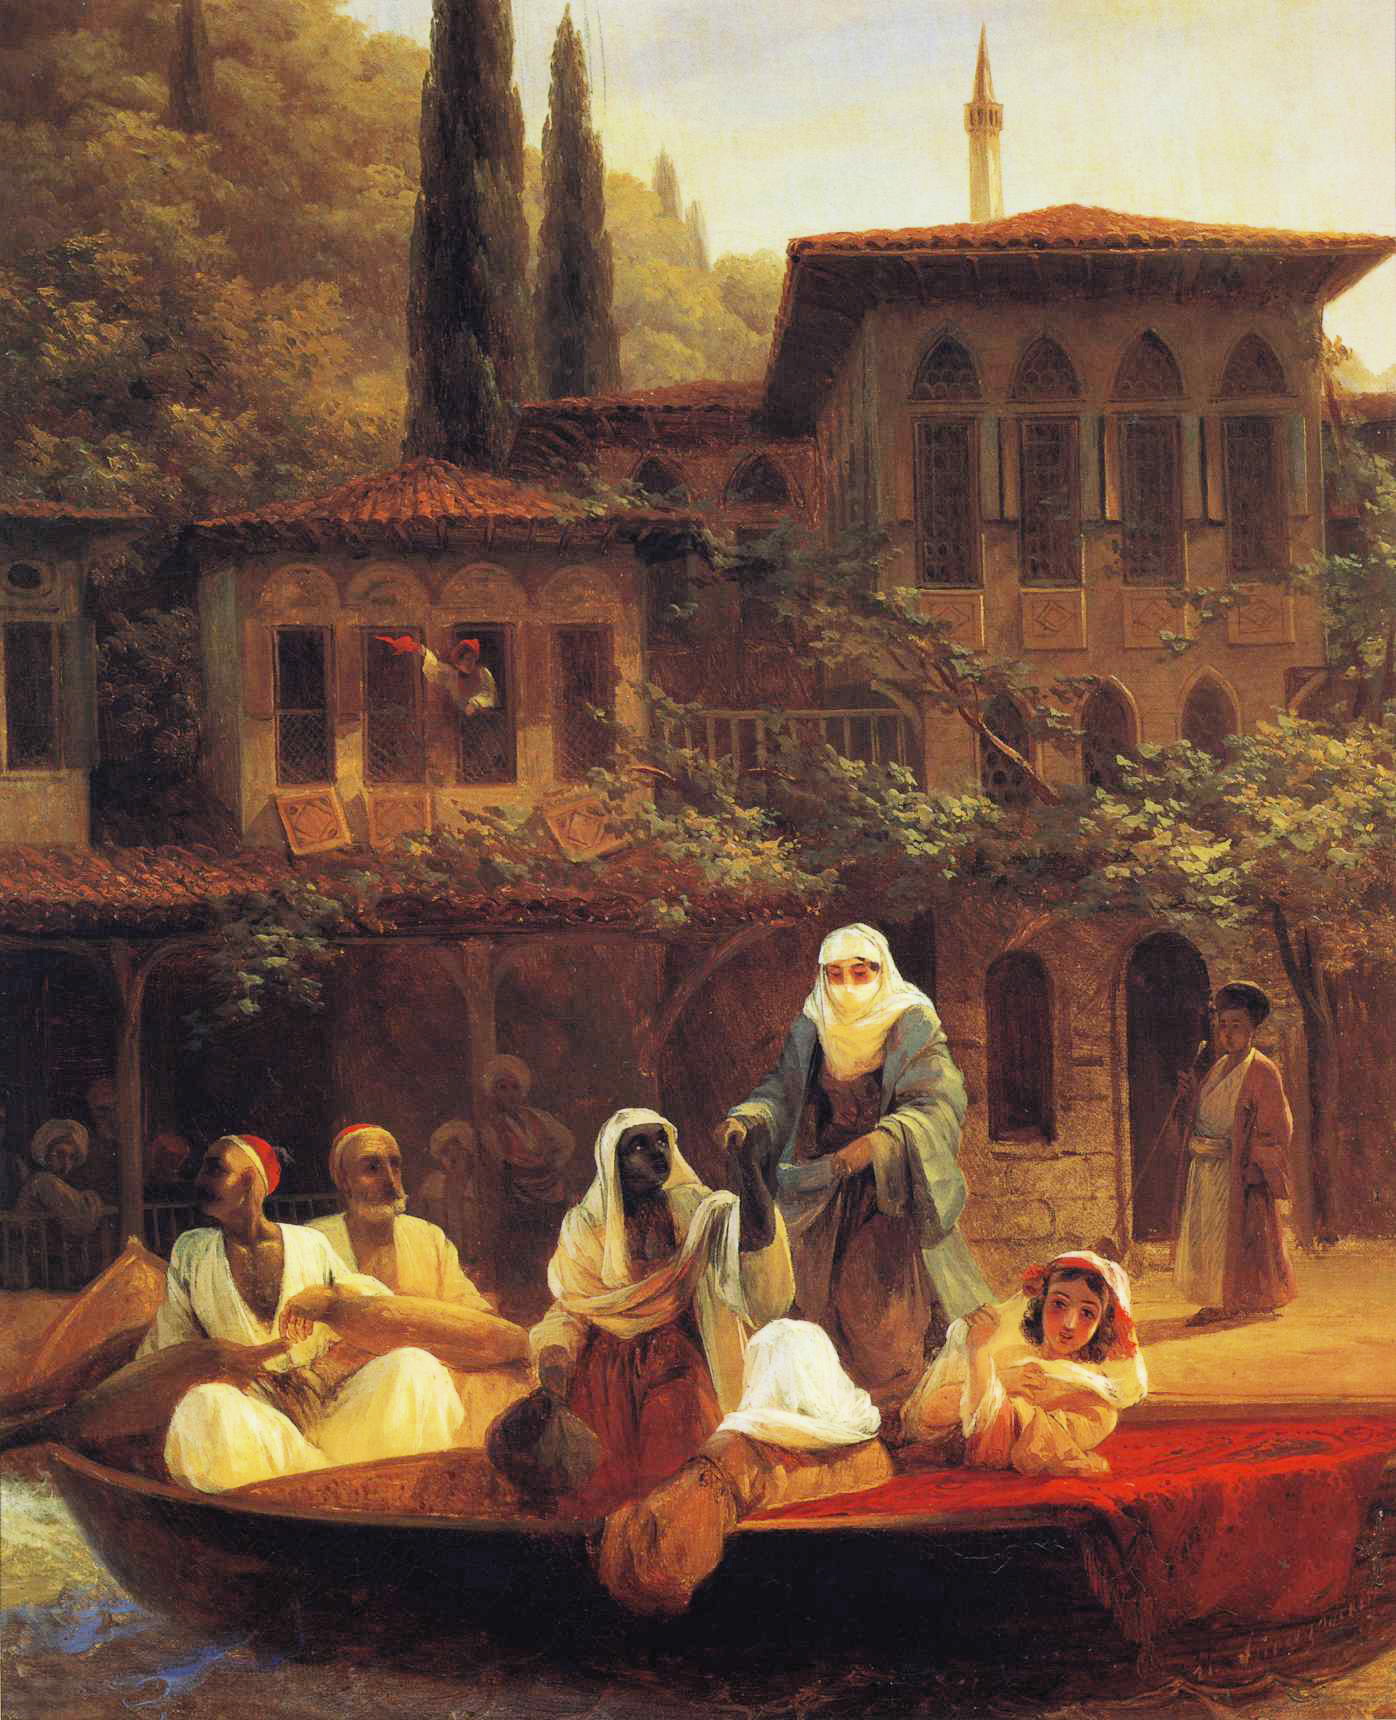 Boat Ride by Kumkapi in Constantinople (1846).